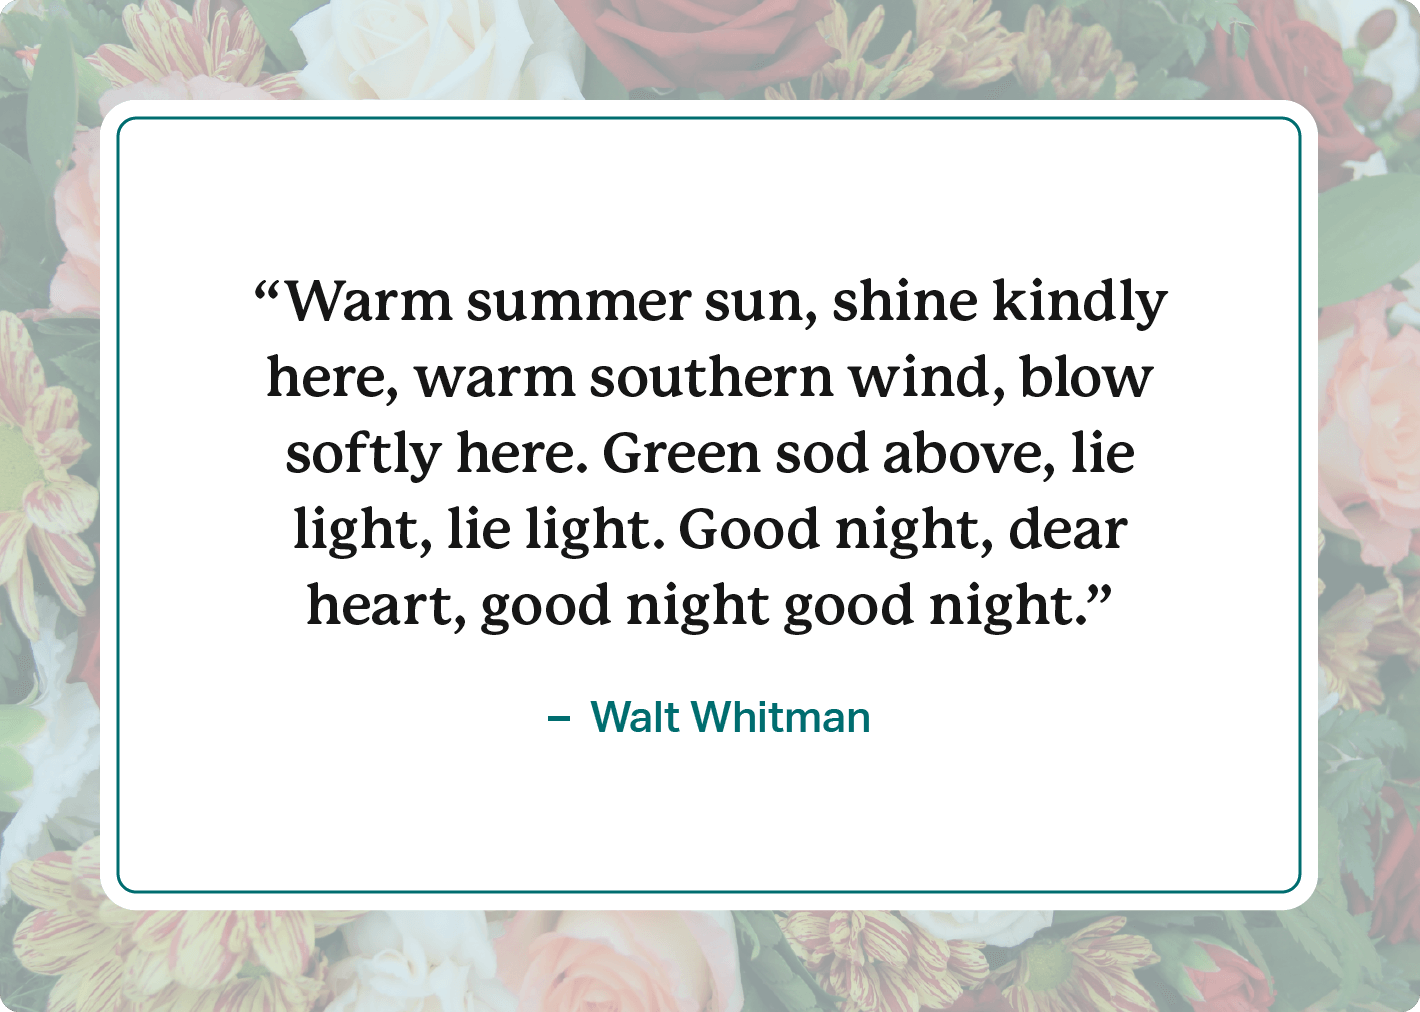 An image of a walt whitman quote